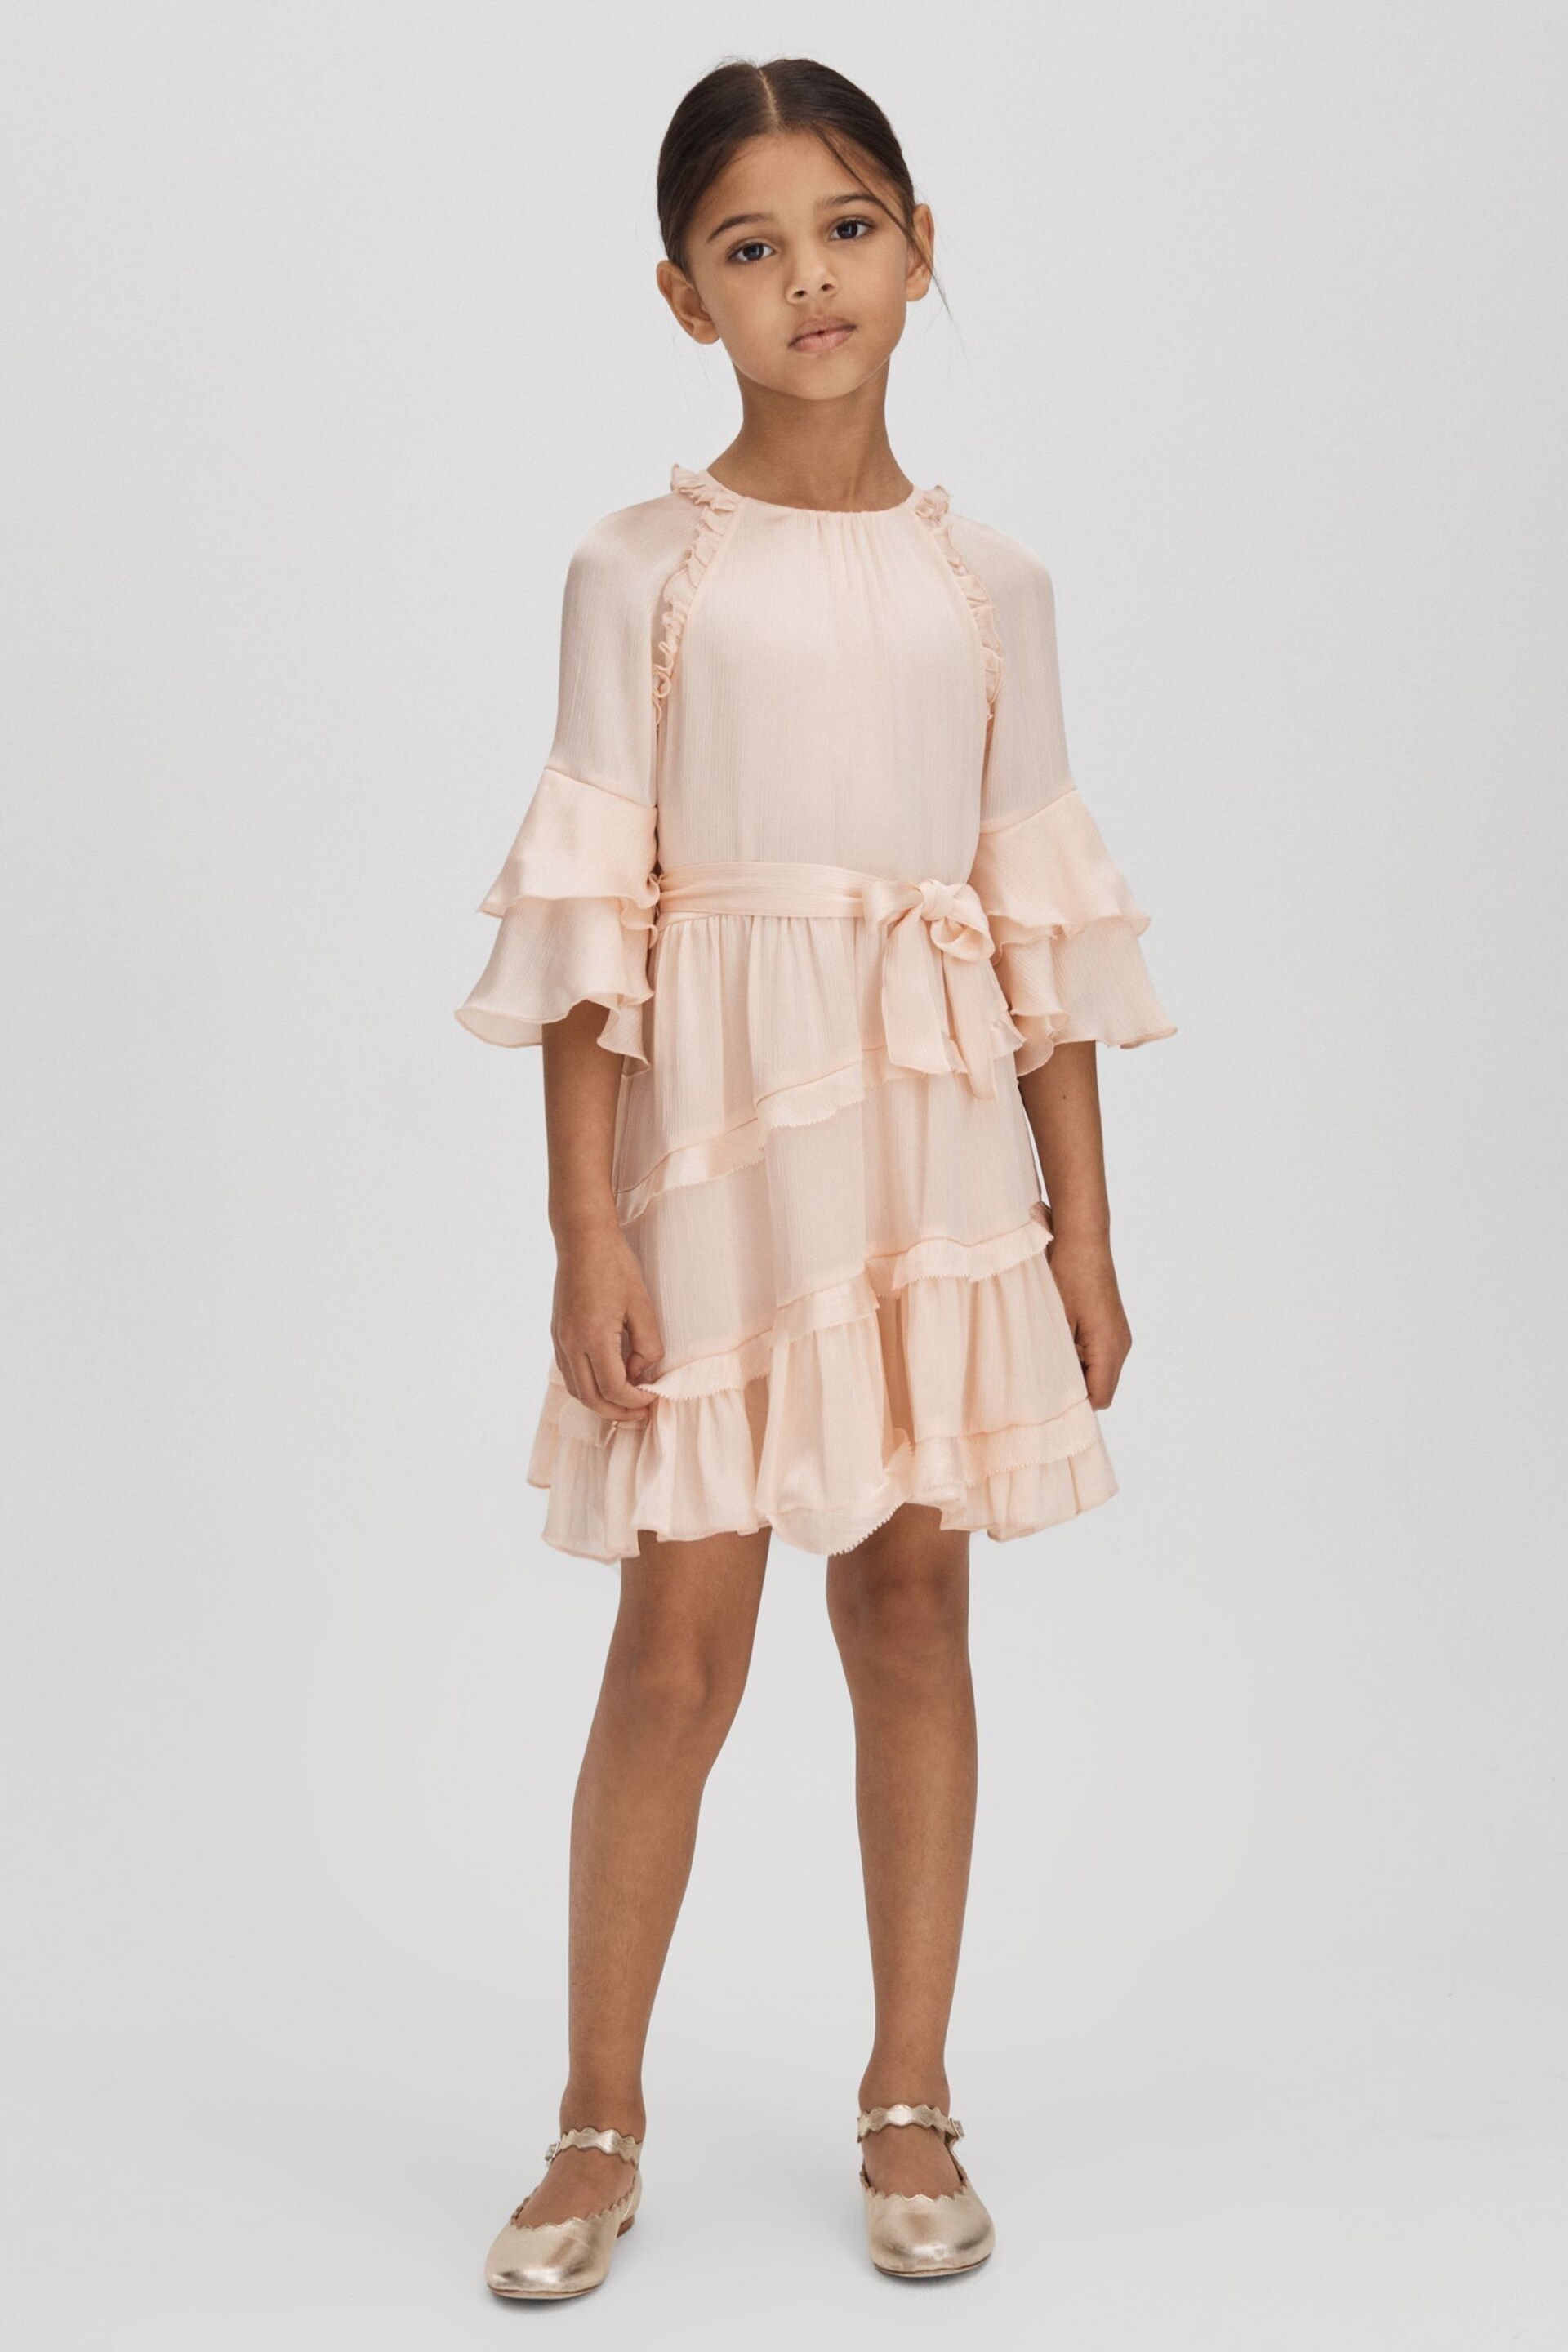 Reiss Pink Polly Senior Textured Satin Frilly Dress - Image 1 of 7